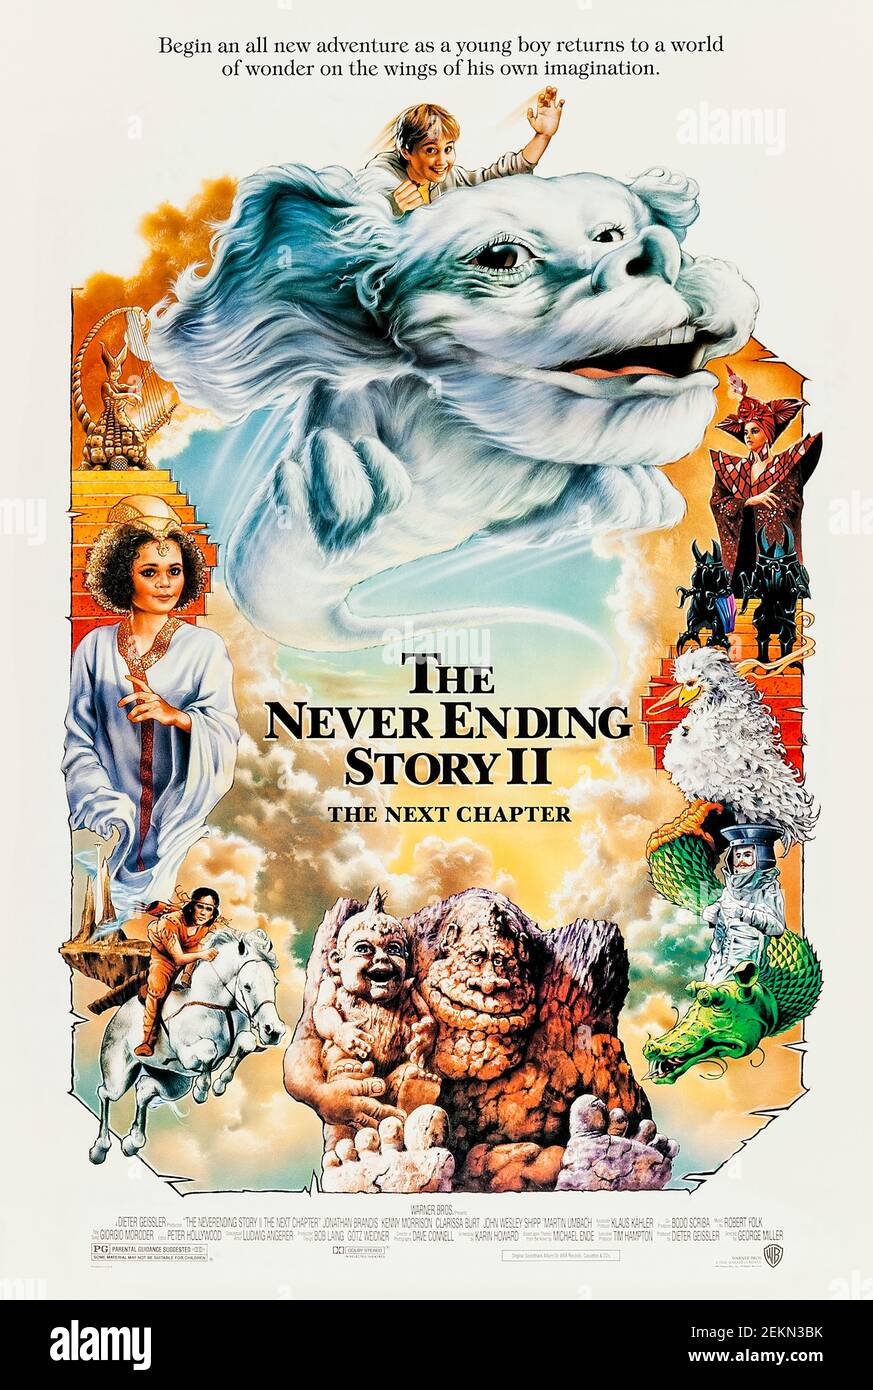 The NeverEnding Story II: The Next Chapter (1990) directed by George Miller and starring Jonathan Brandis, Kenny Morrison and Clarissa Bur. A young boy with a distant father enters a world of make-believe and magic through a portal within an antique book. Stock Photo